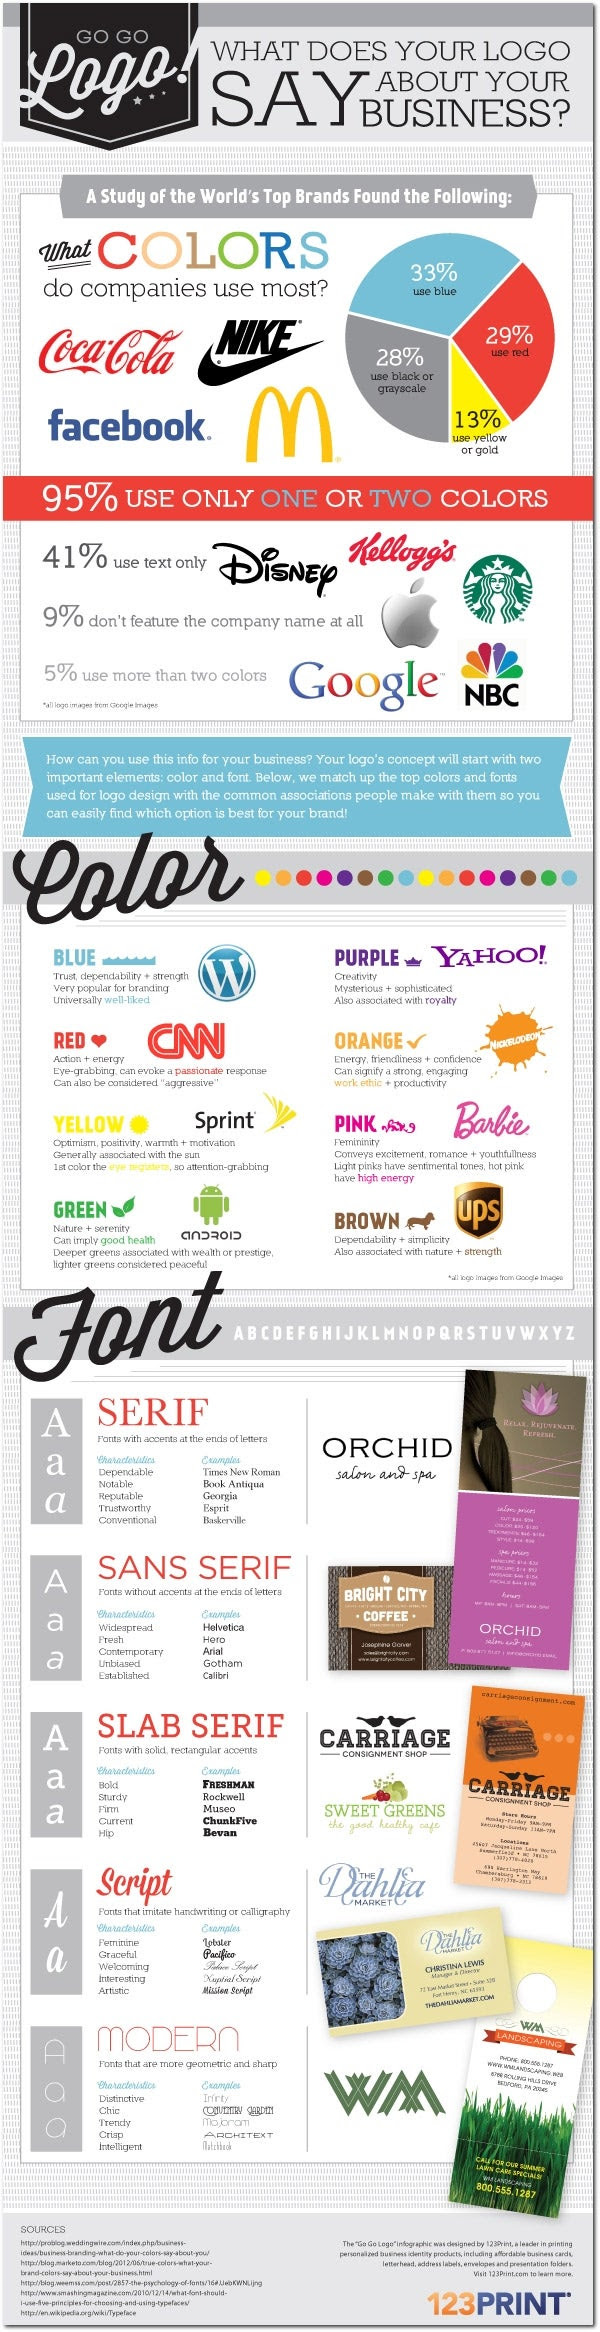 What Does Your Logo Say About Your Business #Infographic #LogoDesign